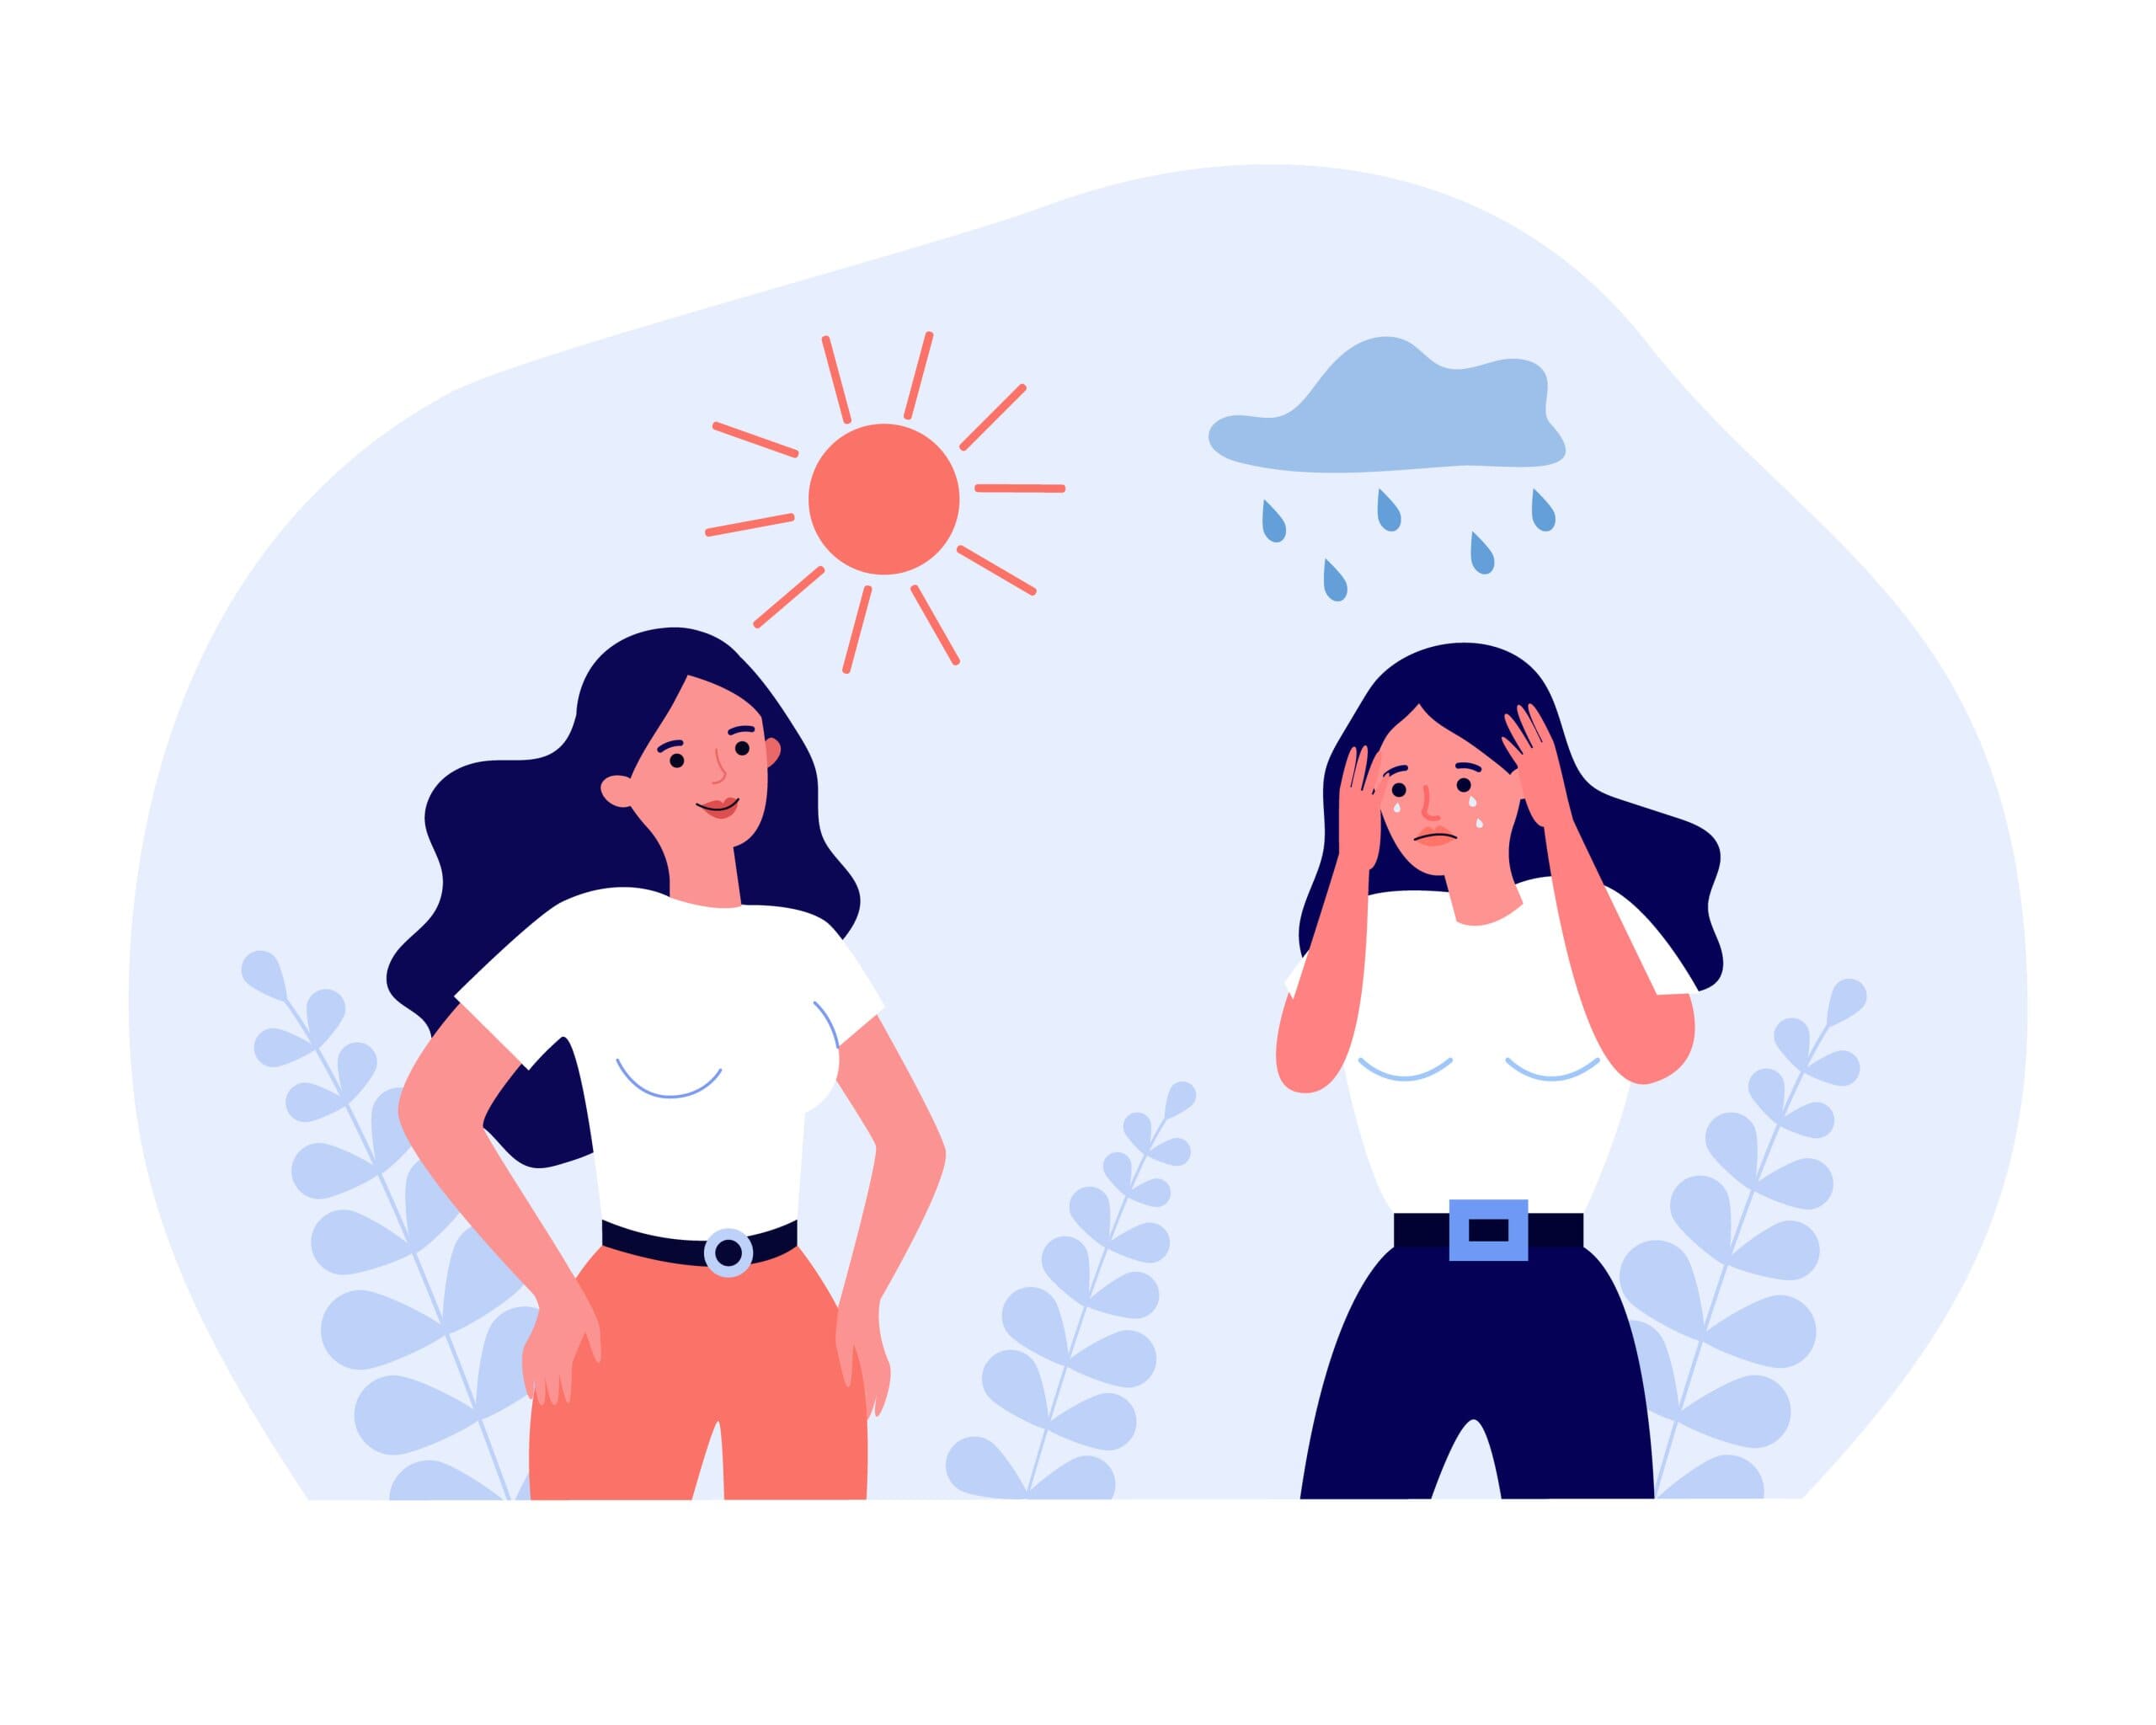 Cartoon image of a girl smiling under a sun and then sad under a rain cloud.